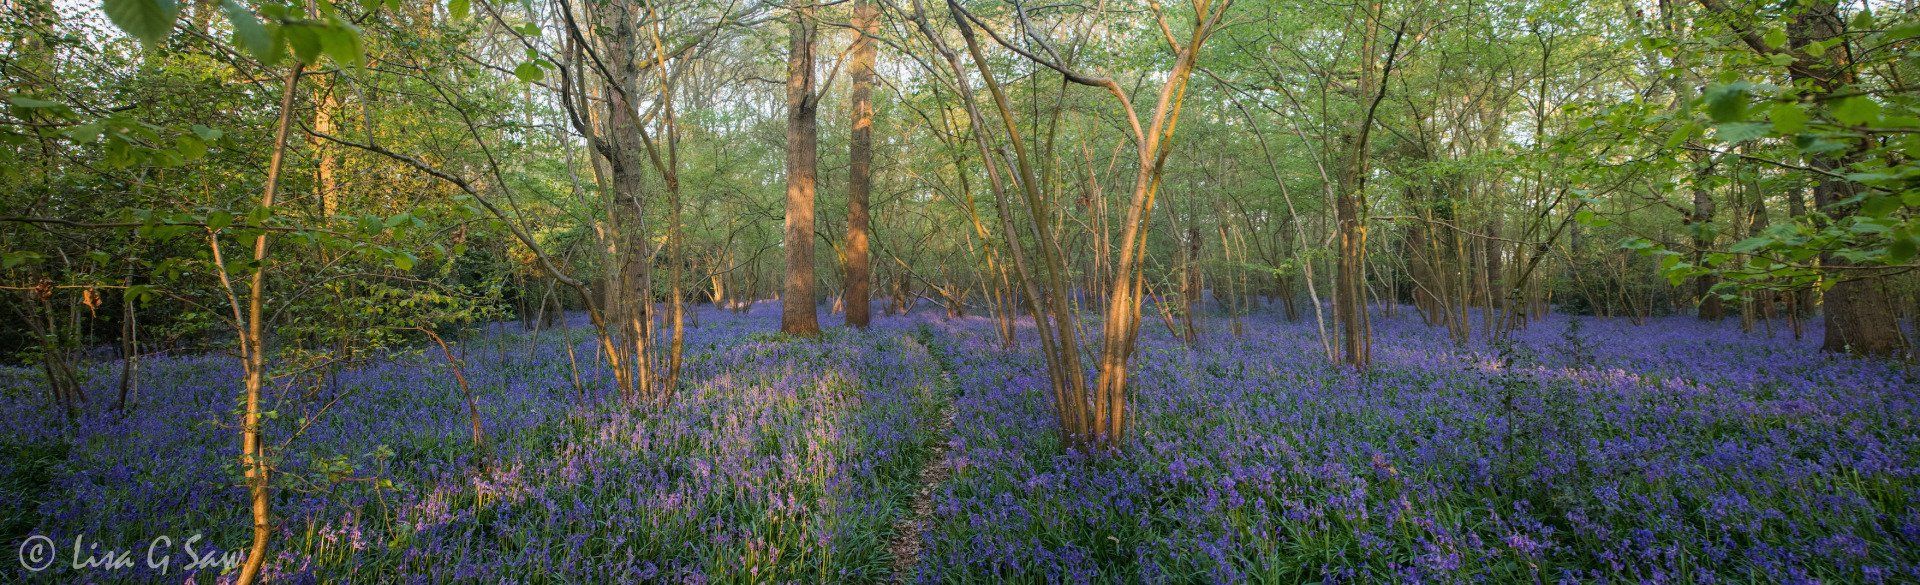 Panorama of a bluebell wood with footpath